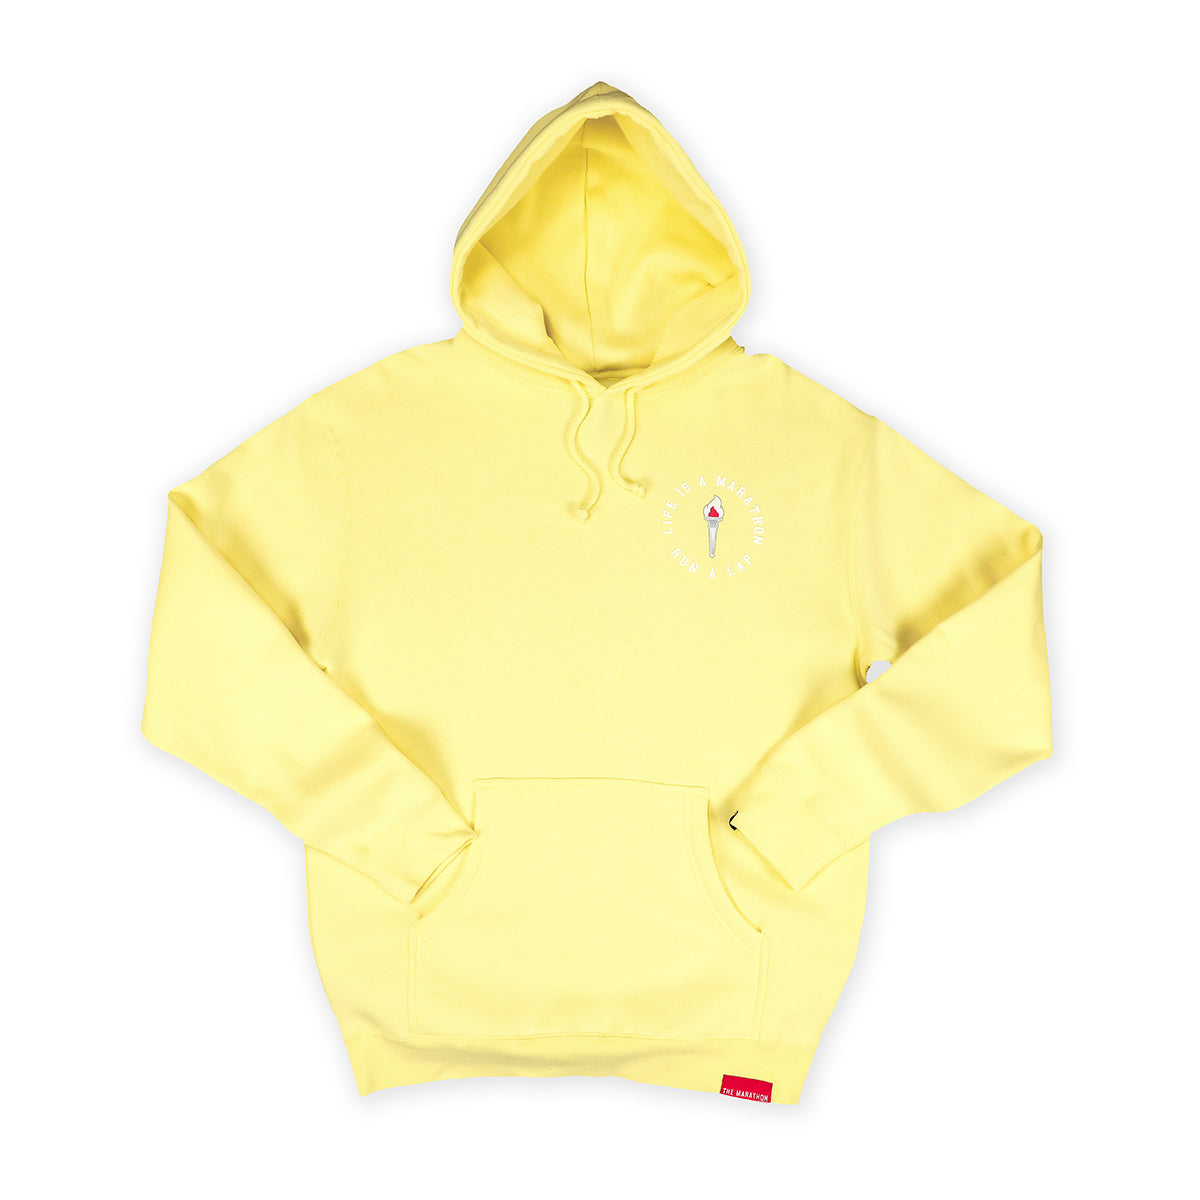 Victory Torch Hoodie - Soft Yellow - Front